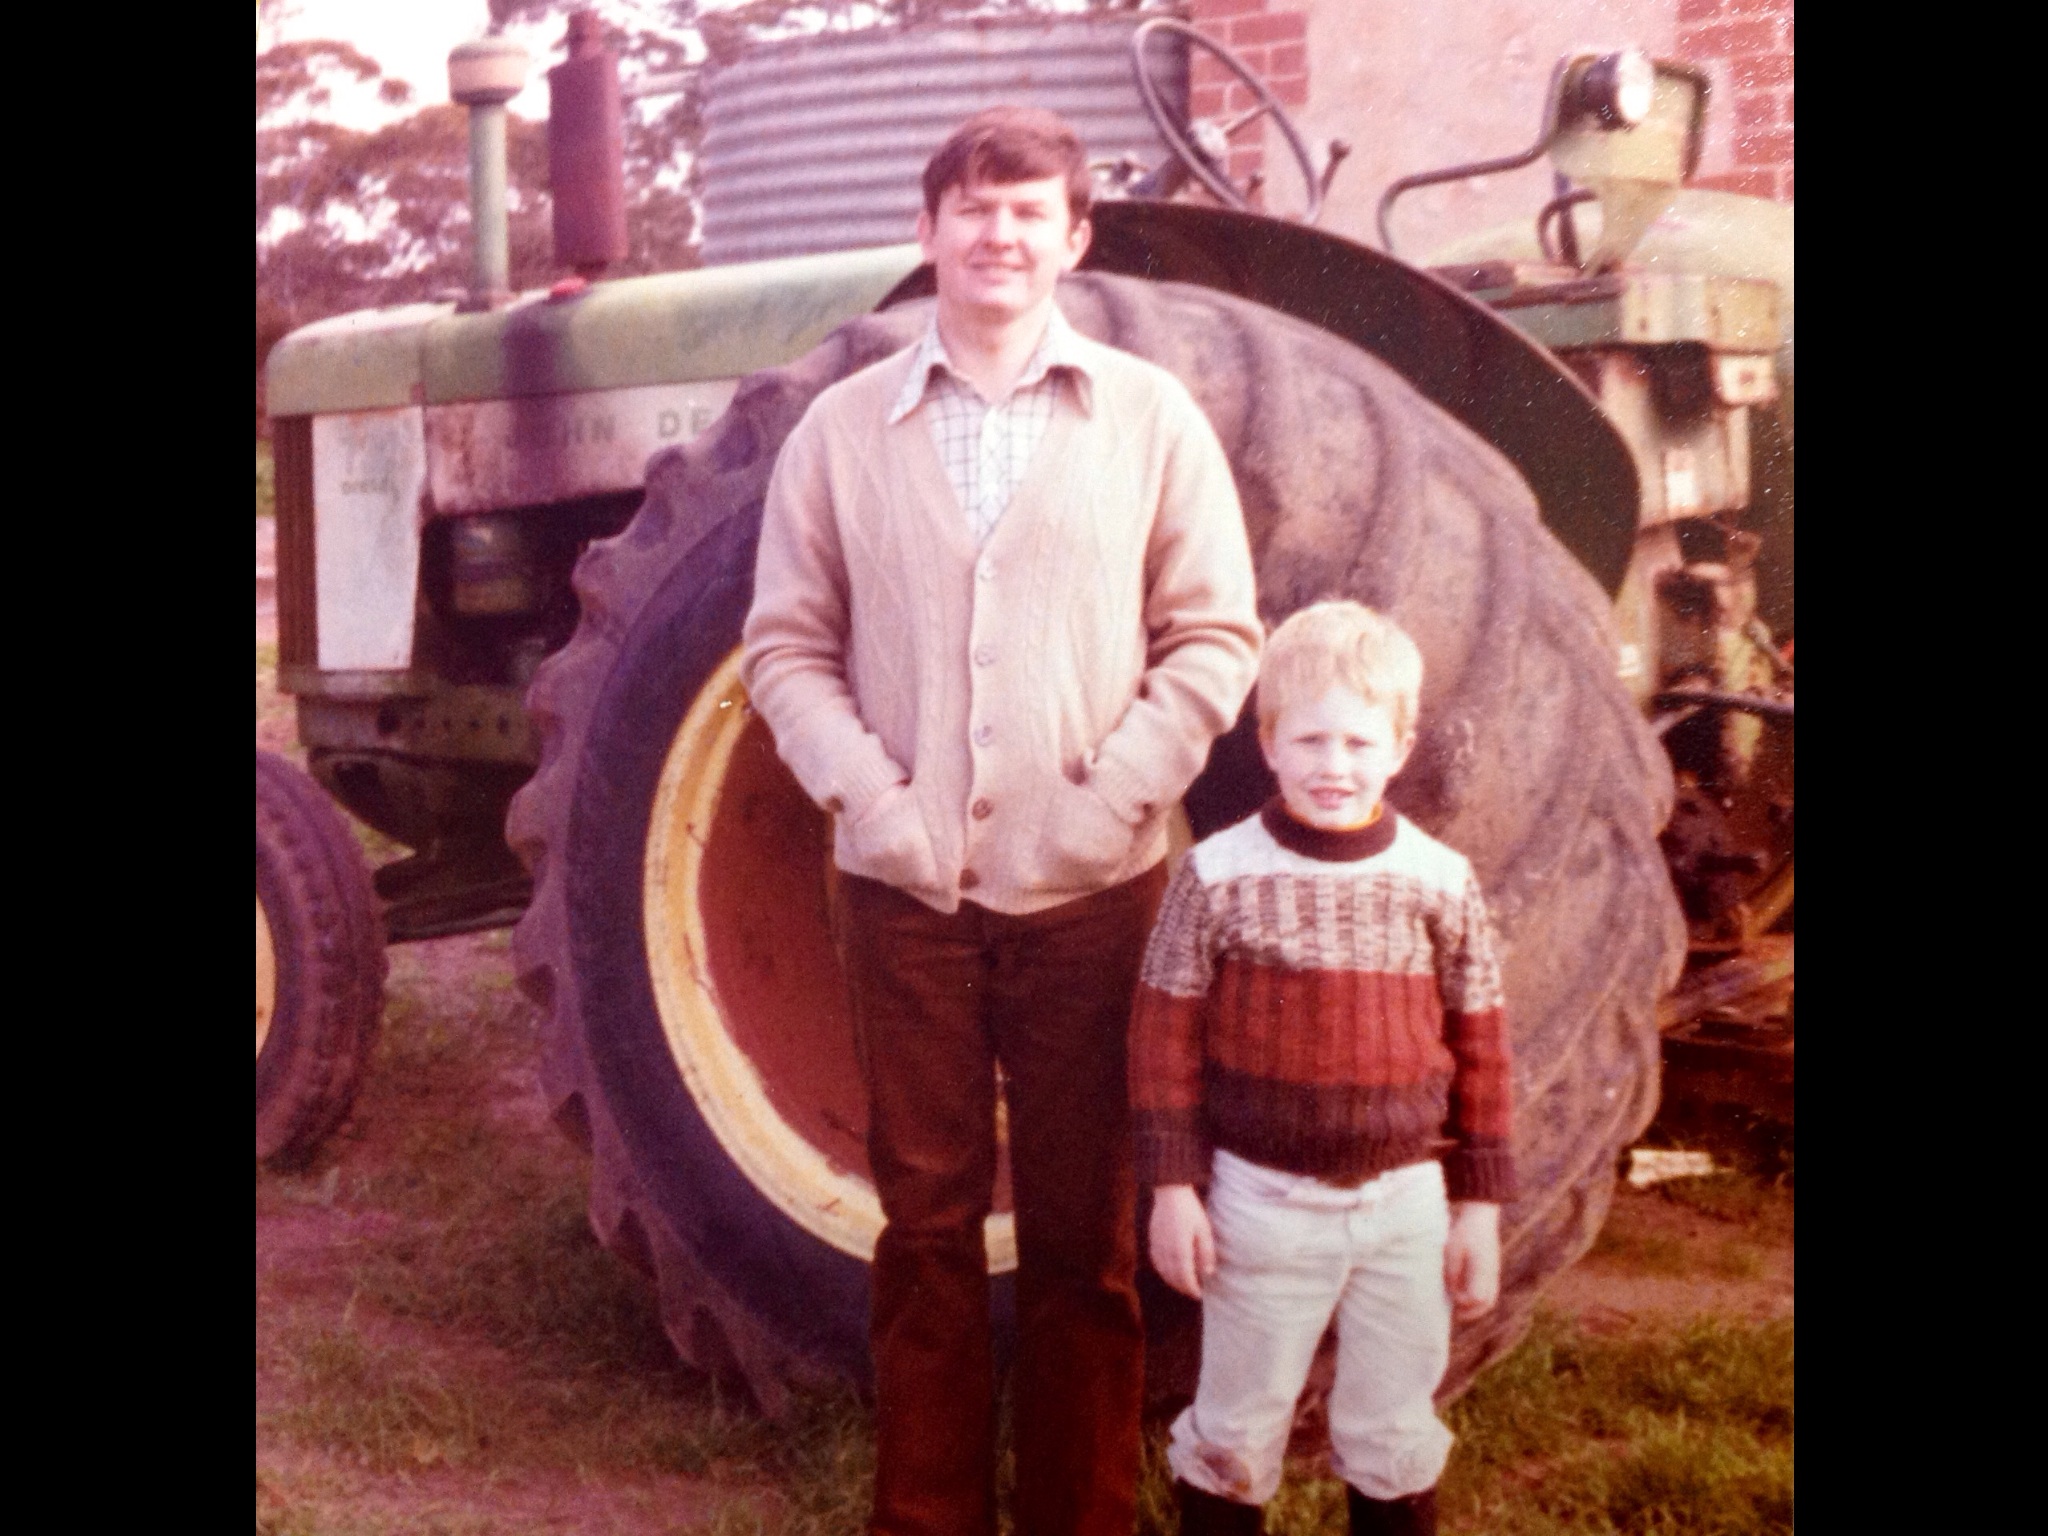 of 1978, country life, country wife, rural living, old homestead , stone cottage, visiting a farm with children